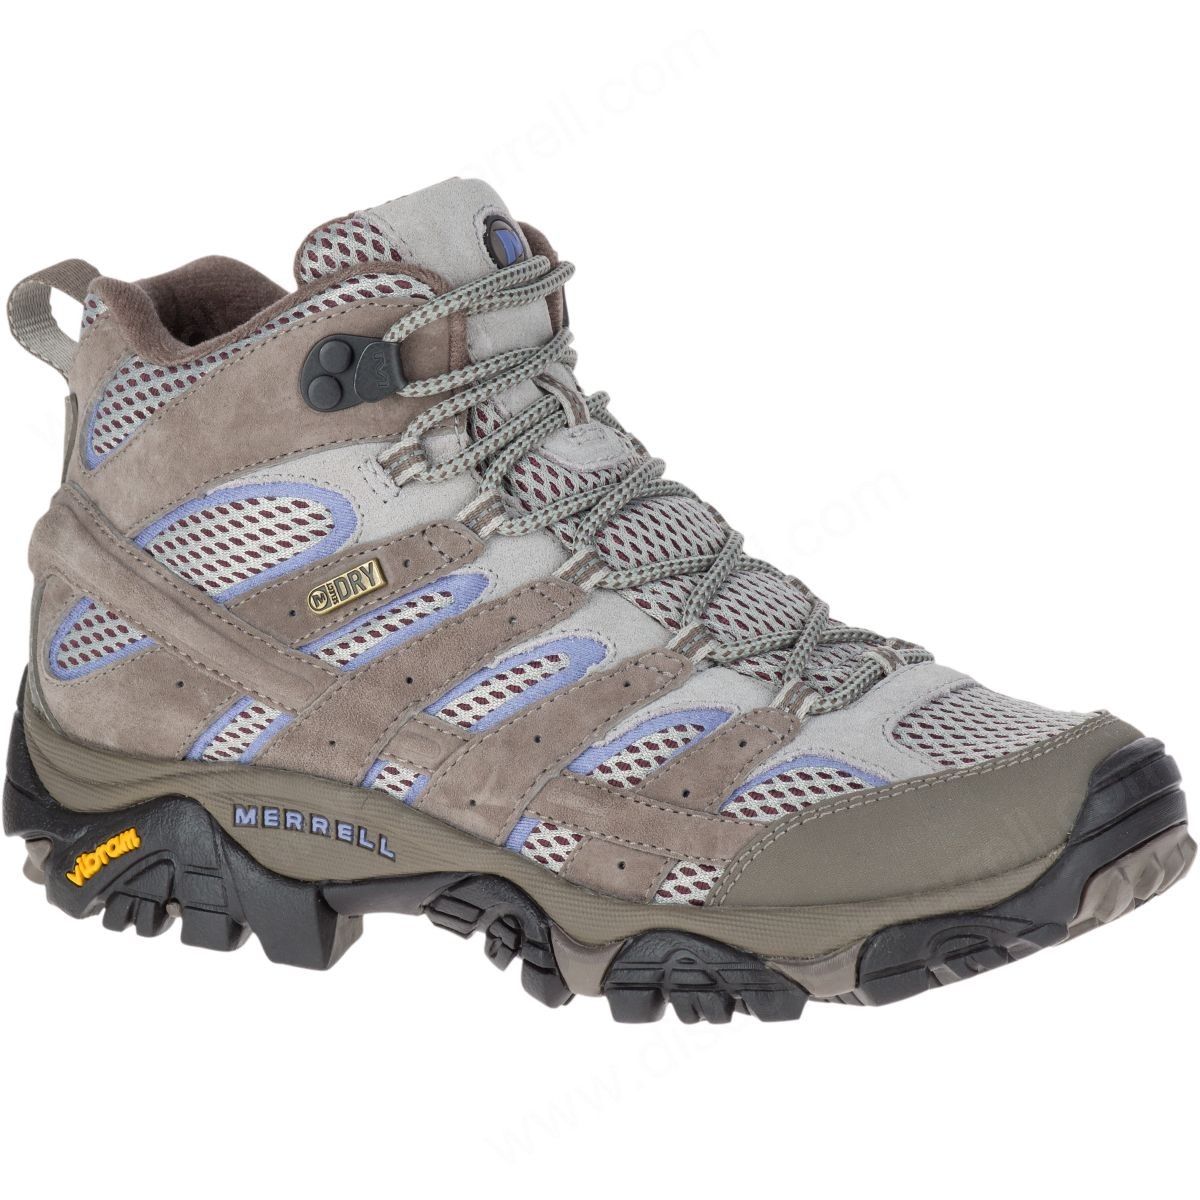 Merrell Womens's Moab Mother Of All Boots™ Mid Waterproof Falcon - Merrell Womens's Moab Mother Of All Boots™ Mid Waterproof Falcon